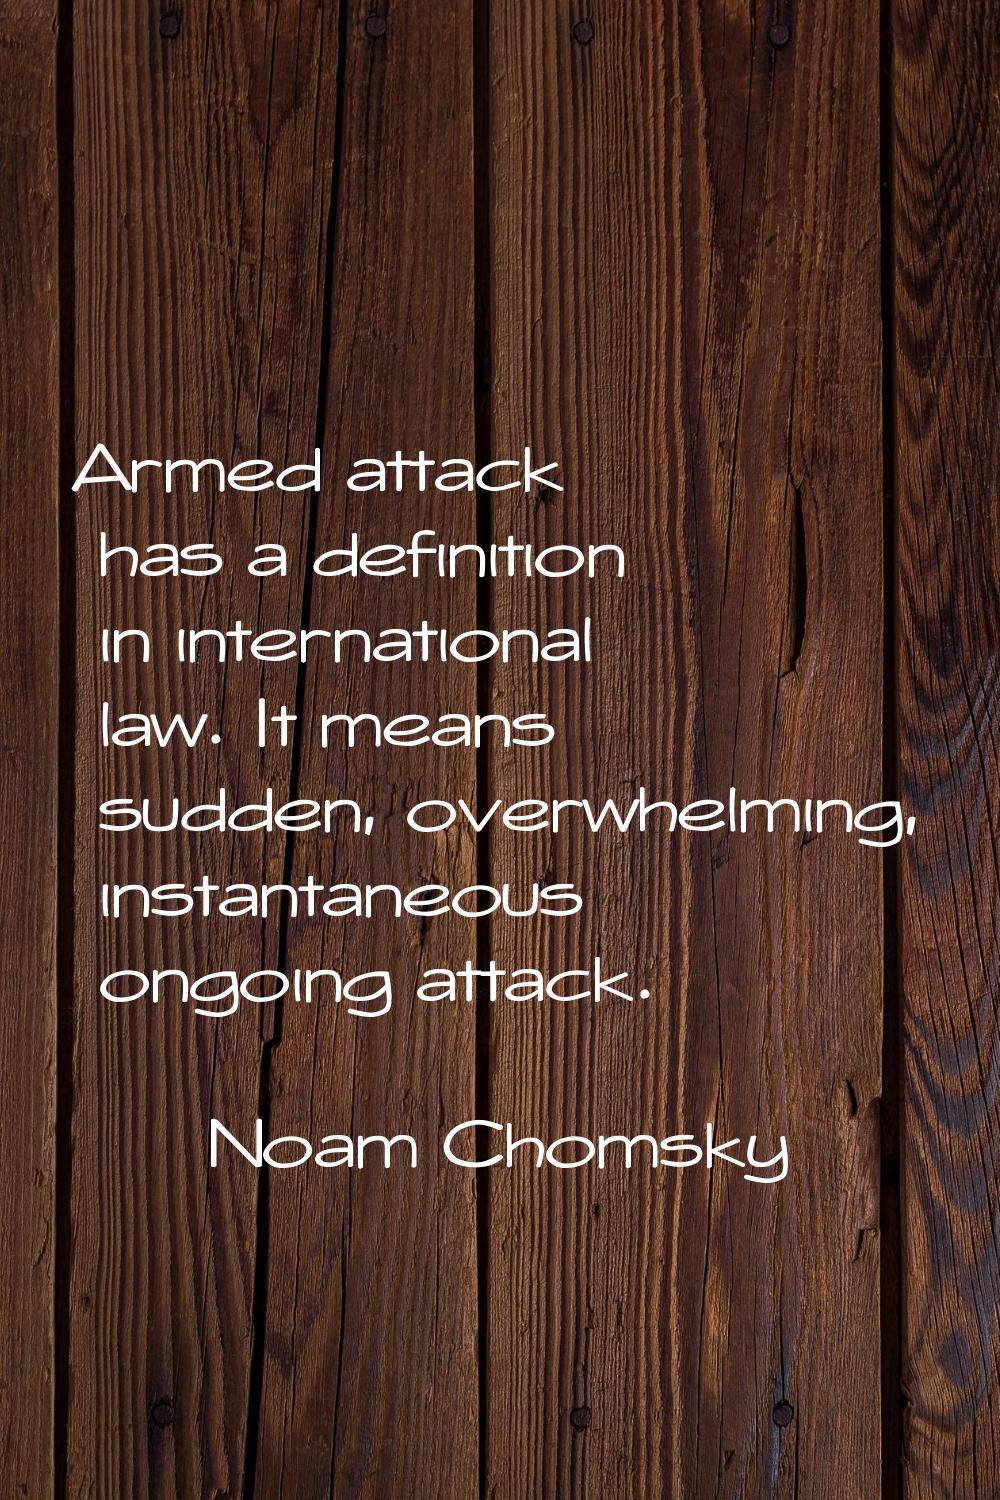 Armed attack has a definition in international law. It means sudden, overwhelming, instantaneous on